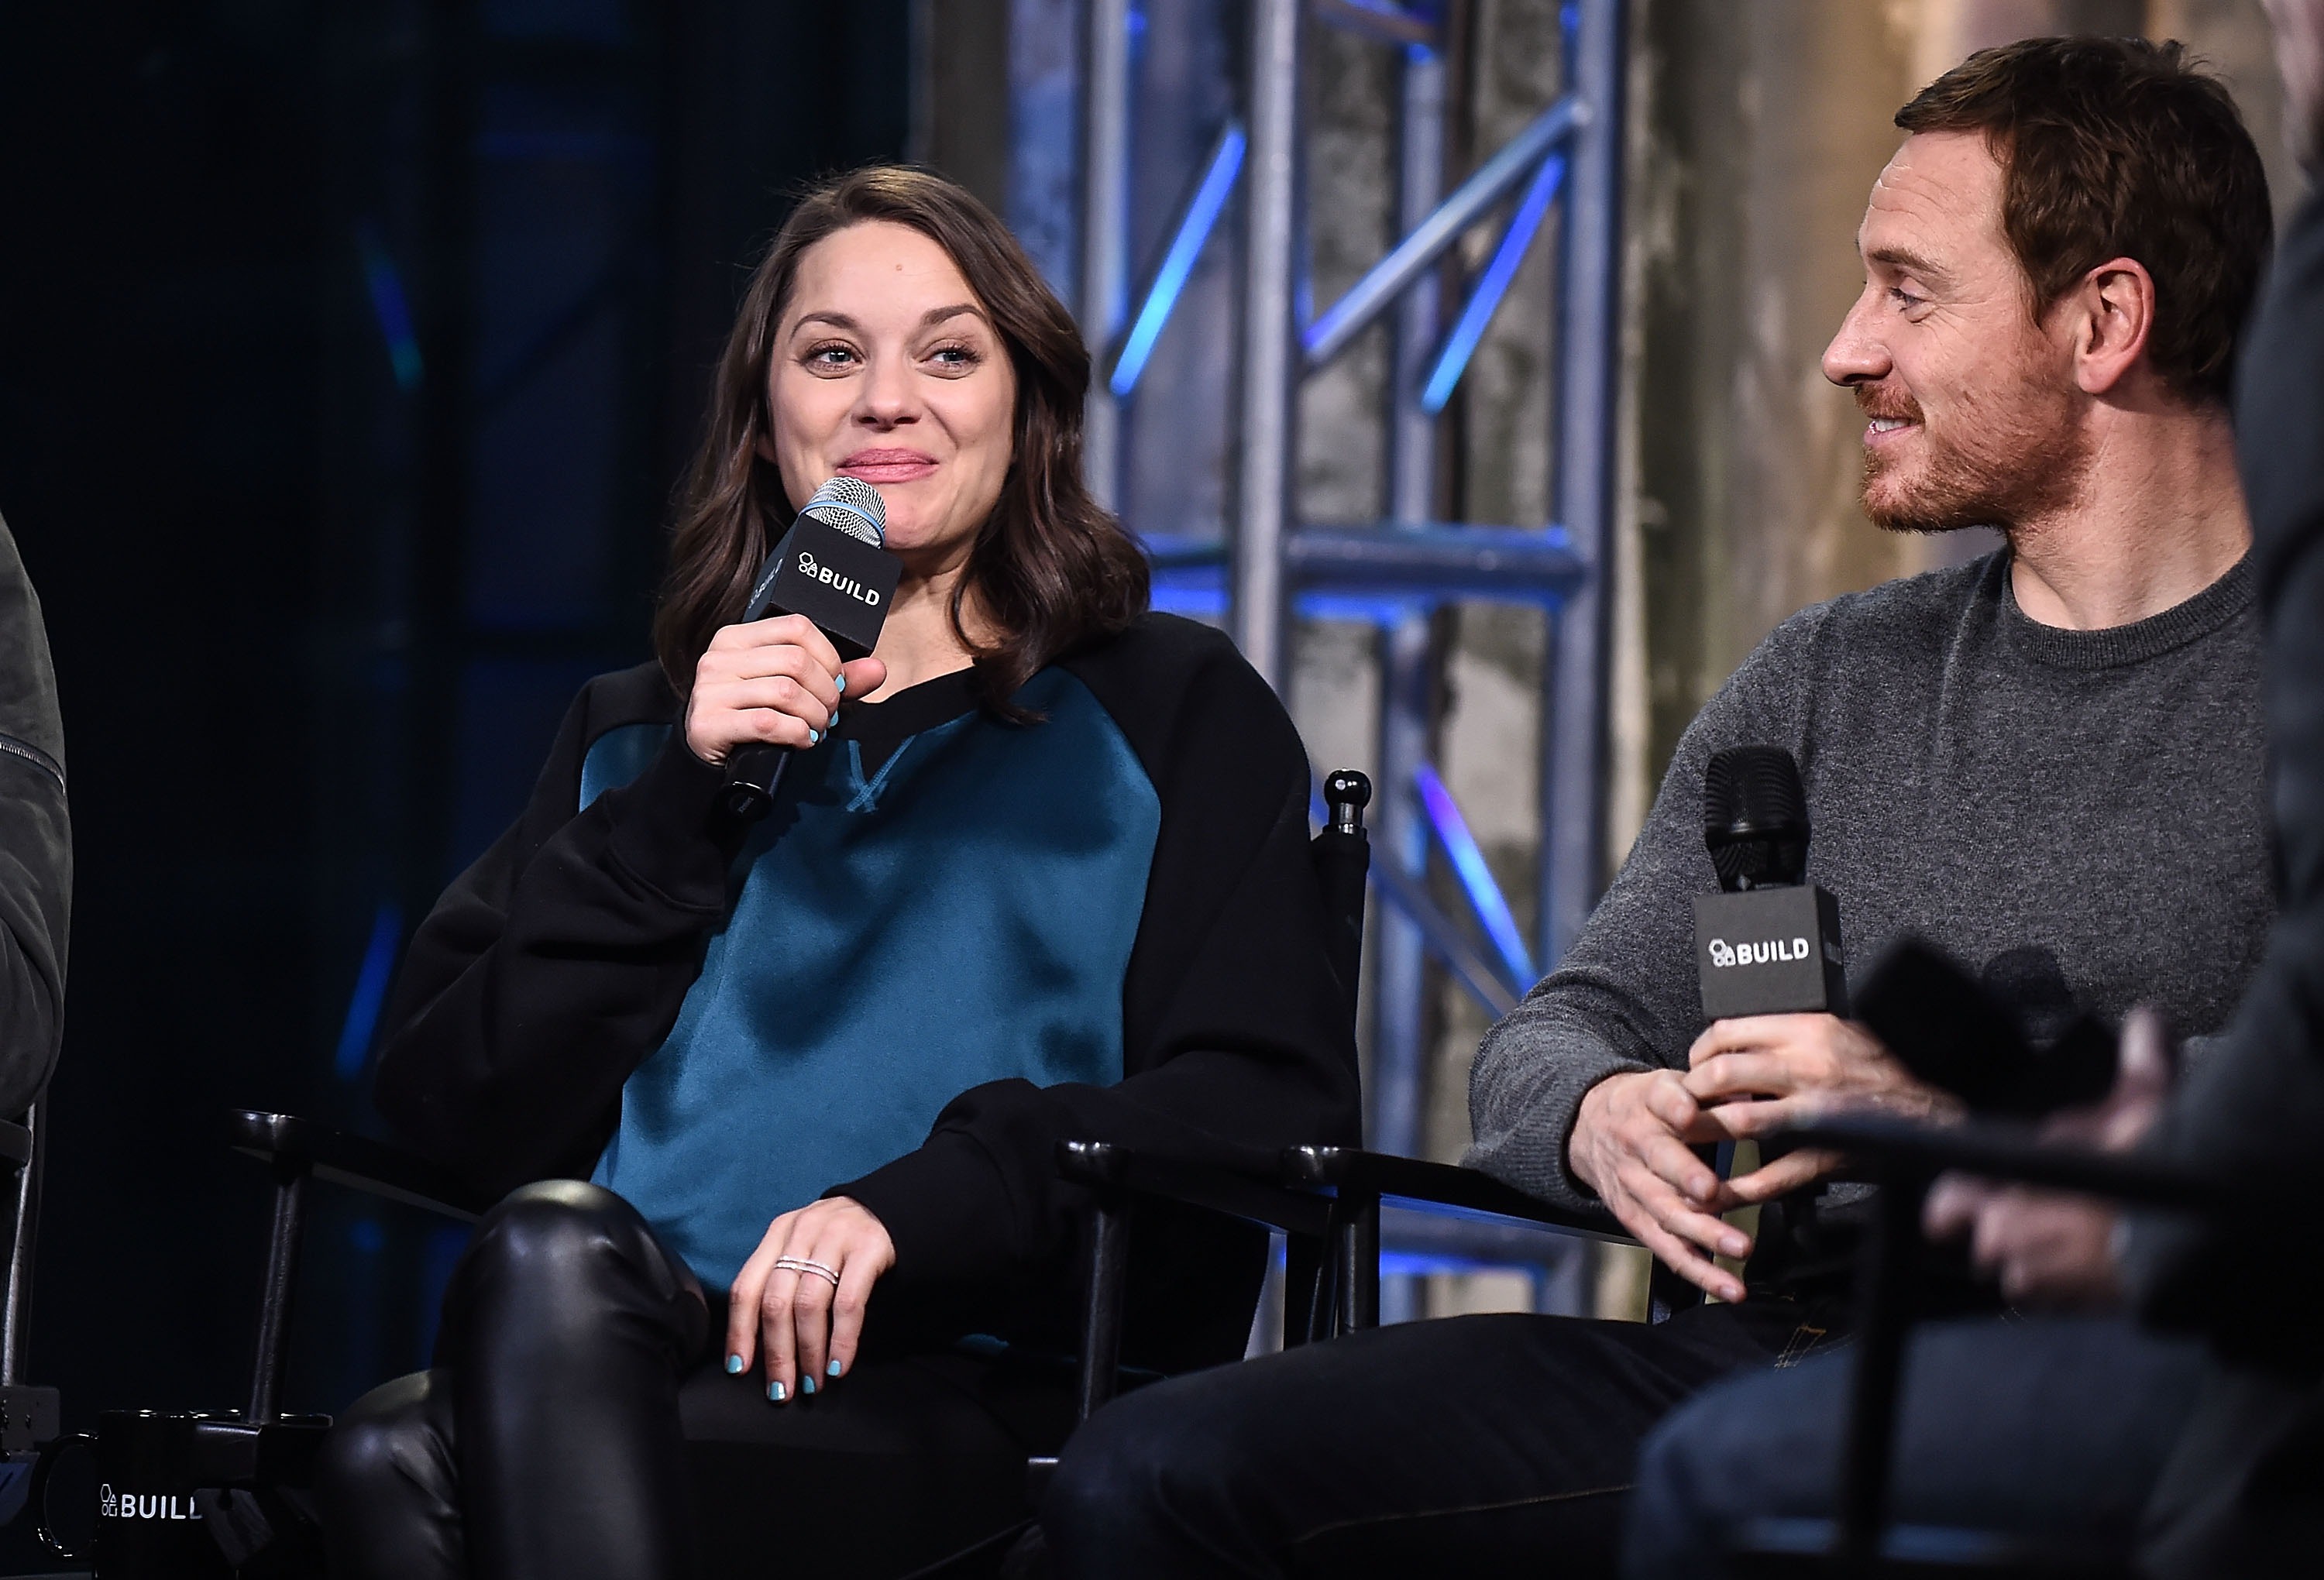 Marion Cotillard attends AOL Build to discuss the movie ‘Assassin’s Creed’